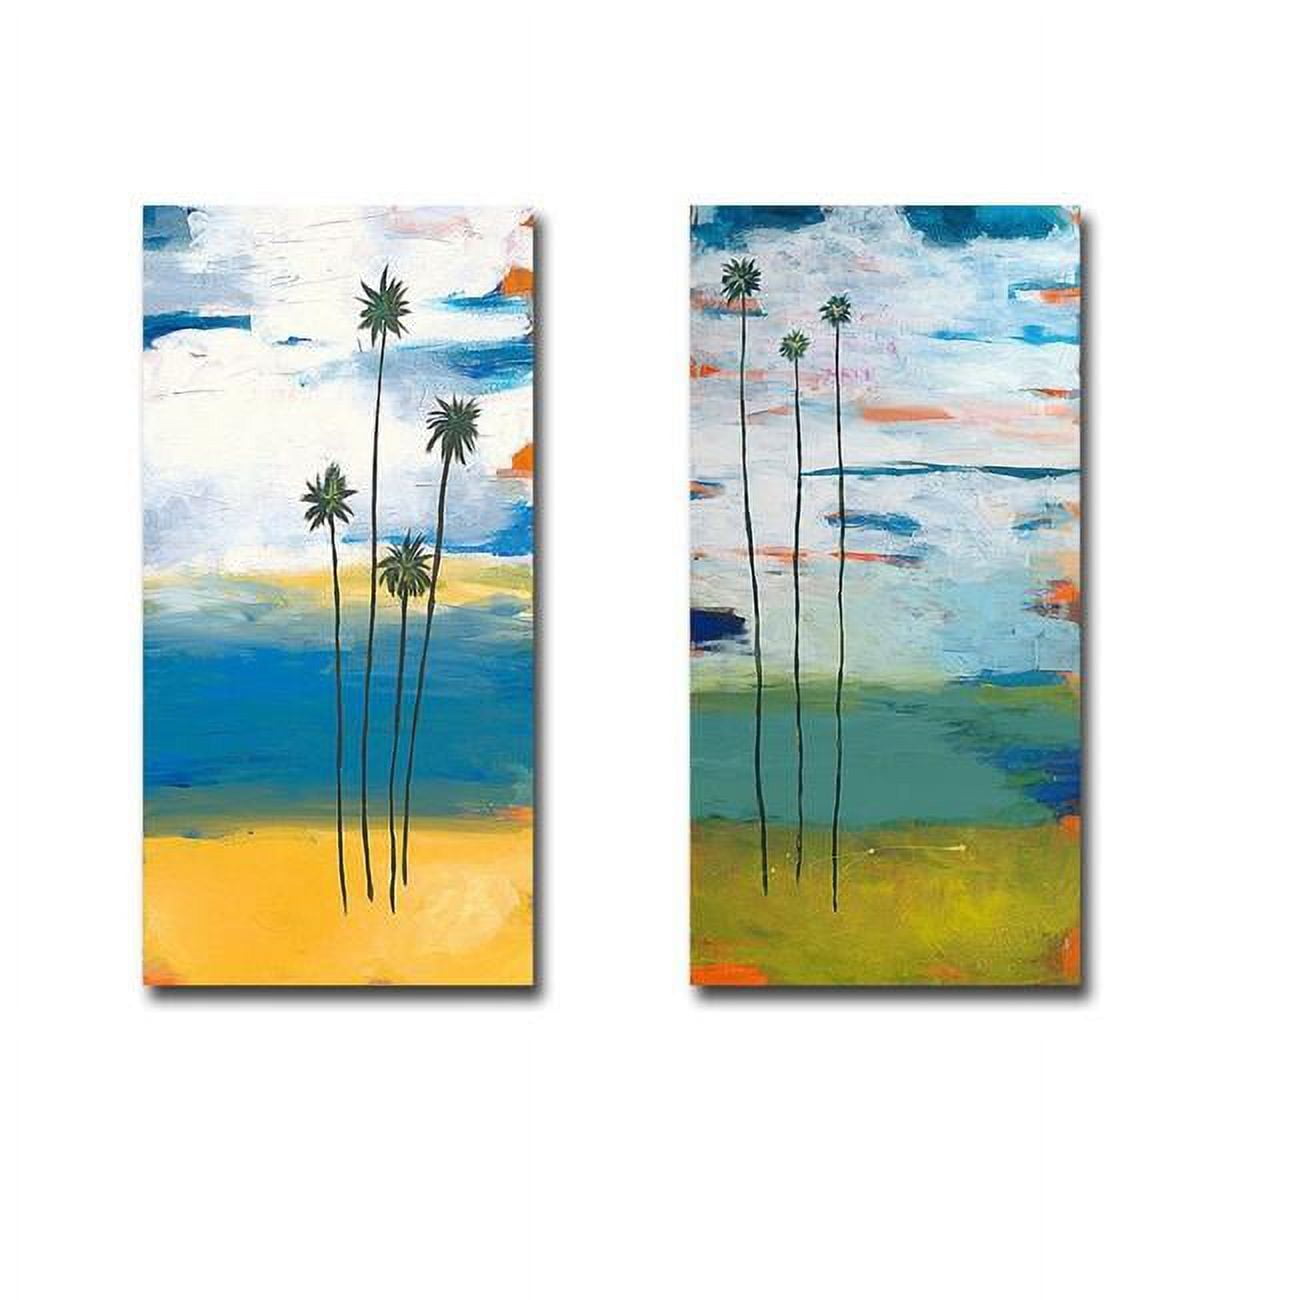 1224856ig Four Palms & Desert Palms By Jan Weiss Premium Gallery-wrapped Canvas Giclee Art Set - Ready To Hang, 12 X 24 X 1.5 In.